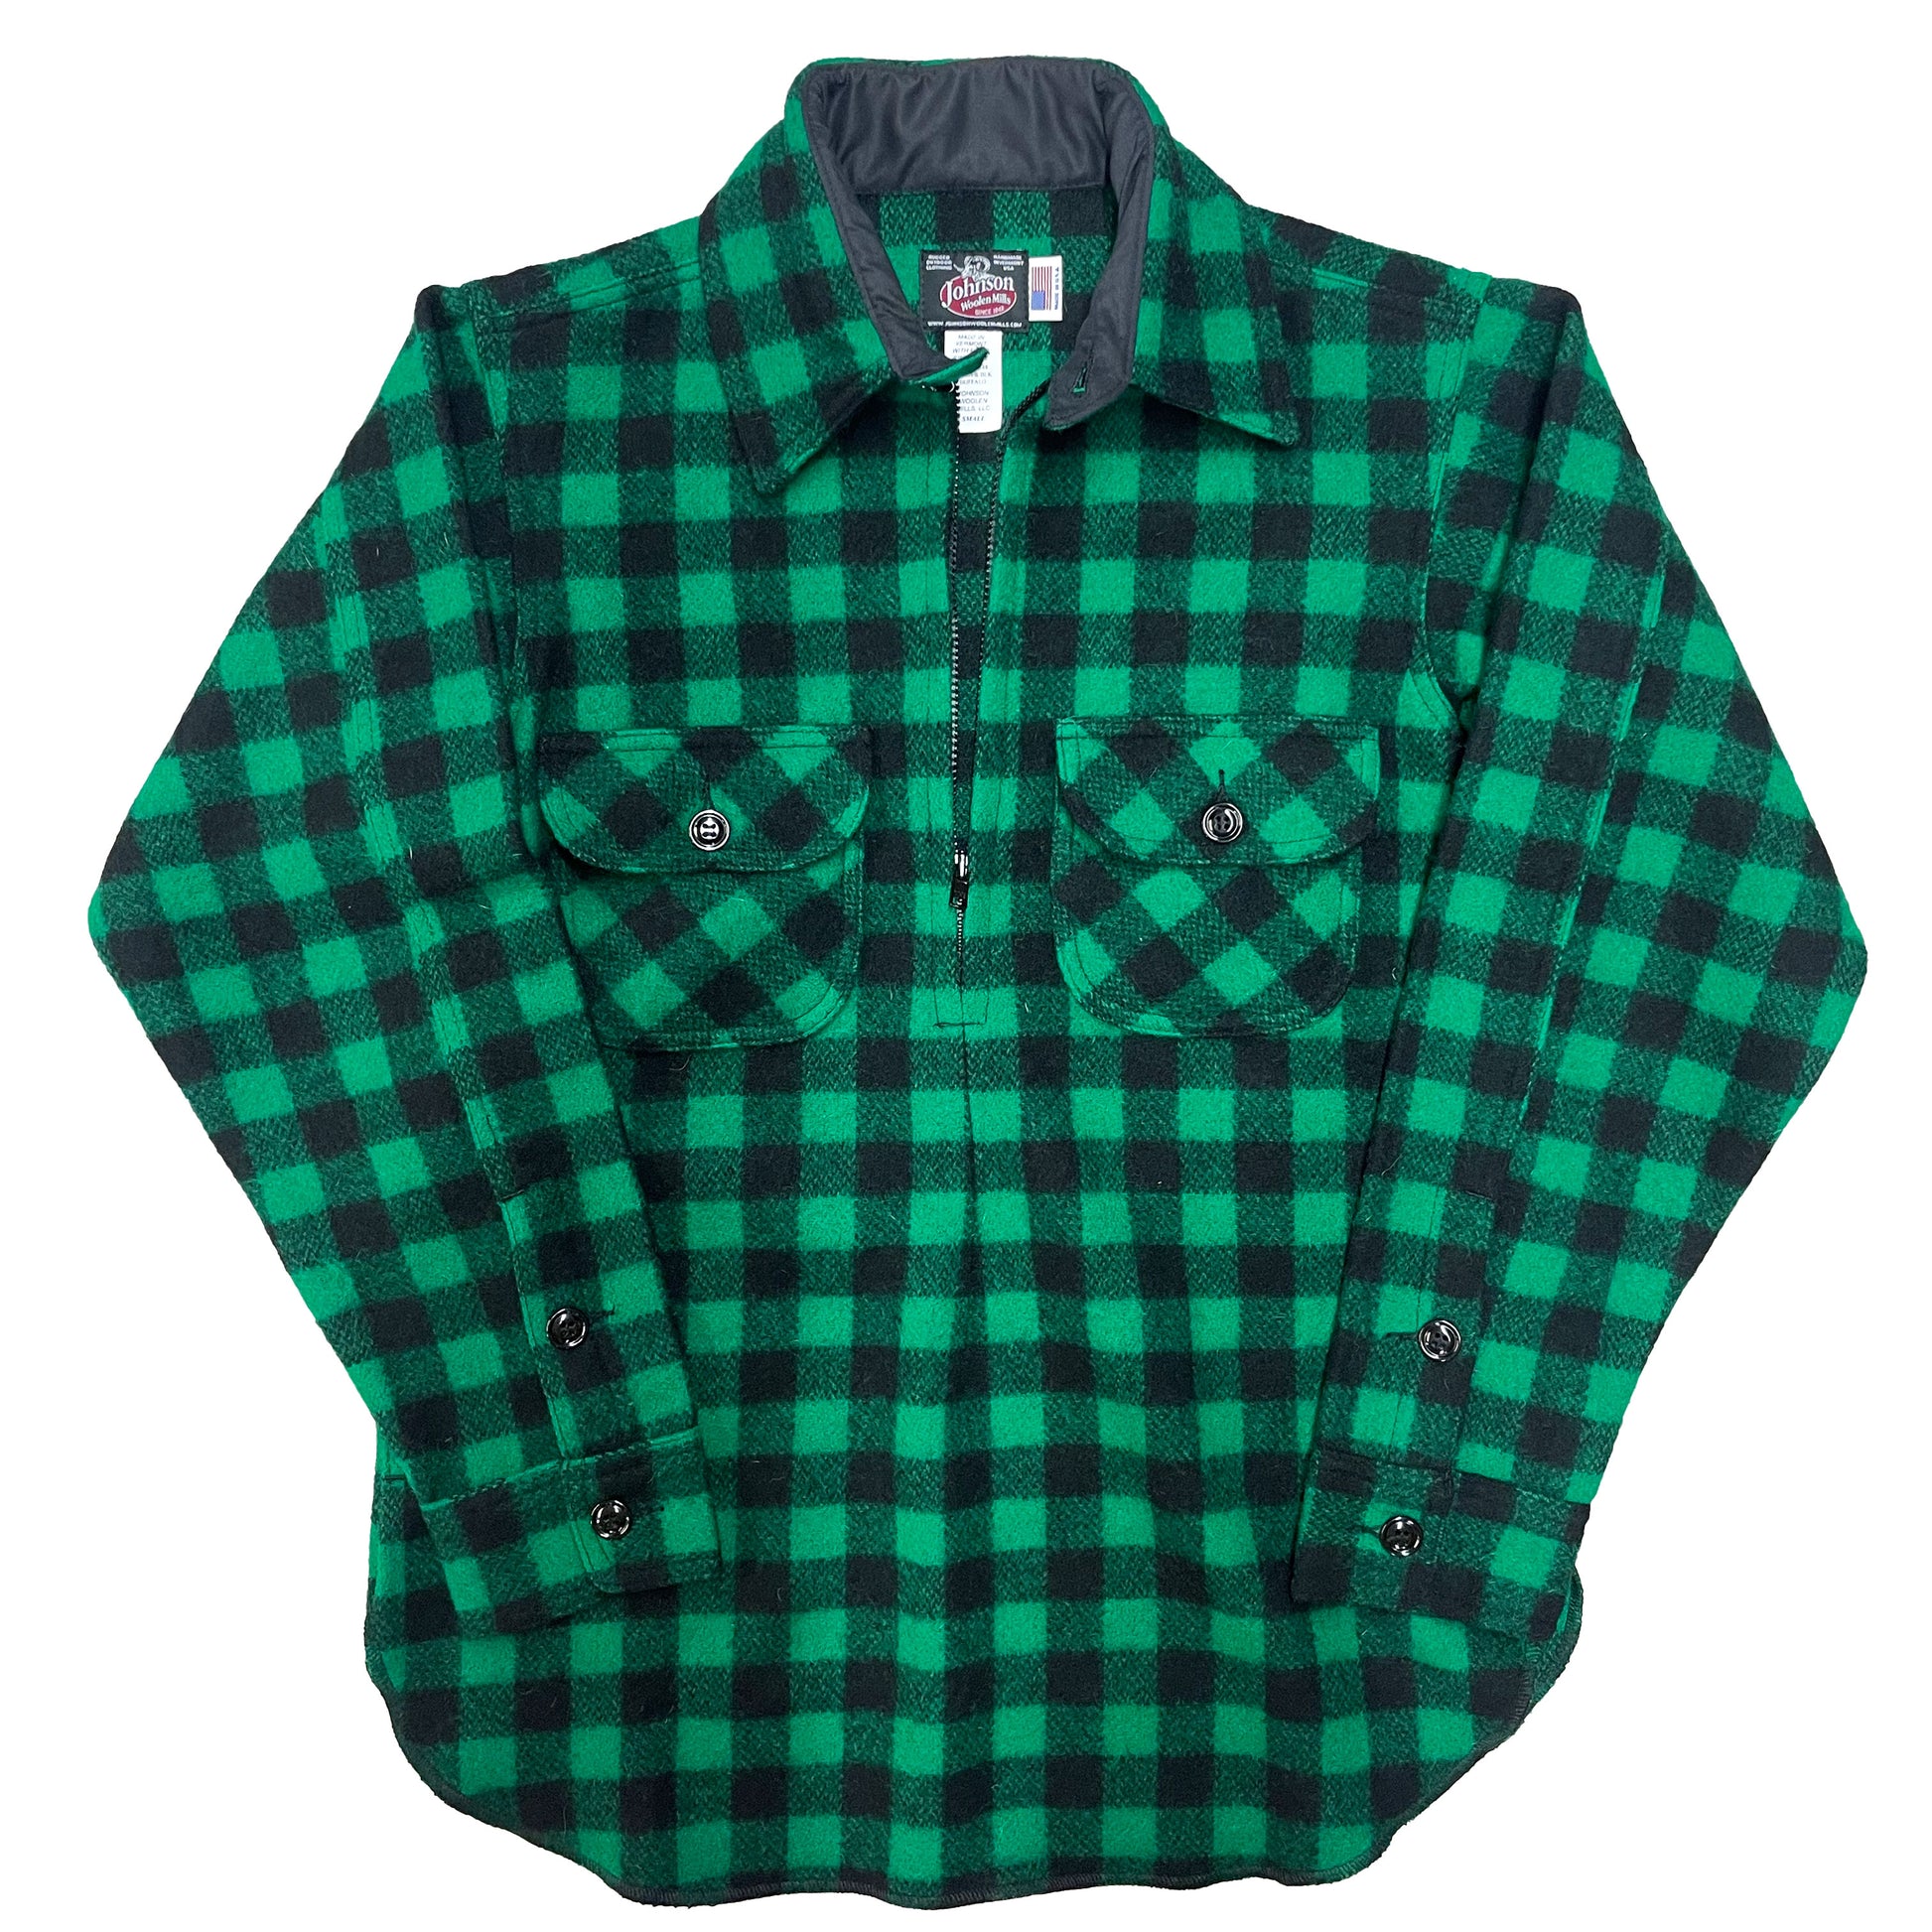 Half Zip Wool shirt - pull over design with a long rounded tail, half zip and two chest pockets. Shown in green and black buffalo plaid